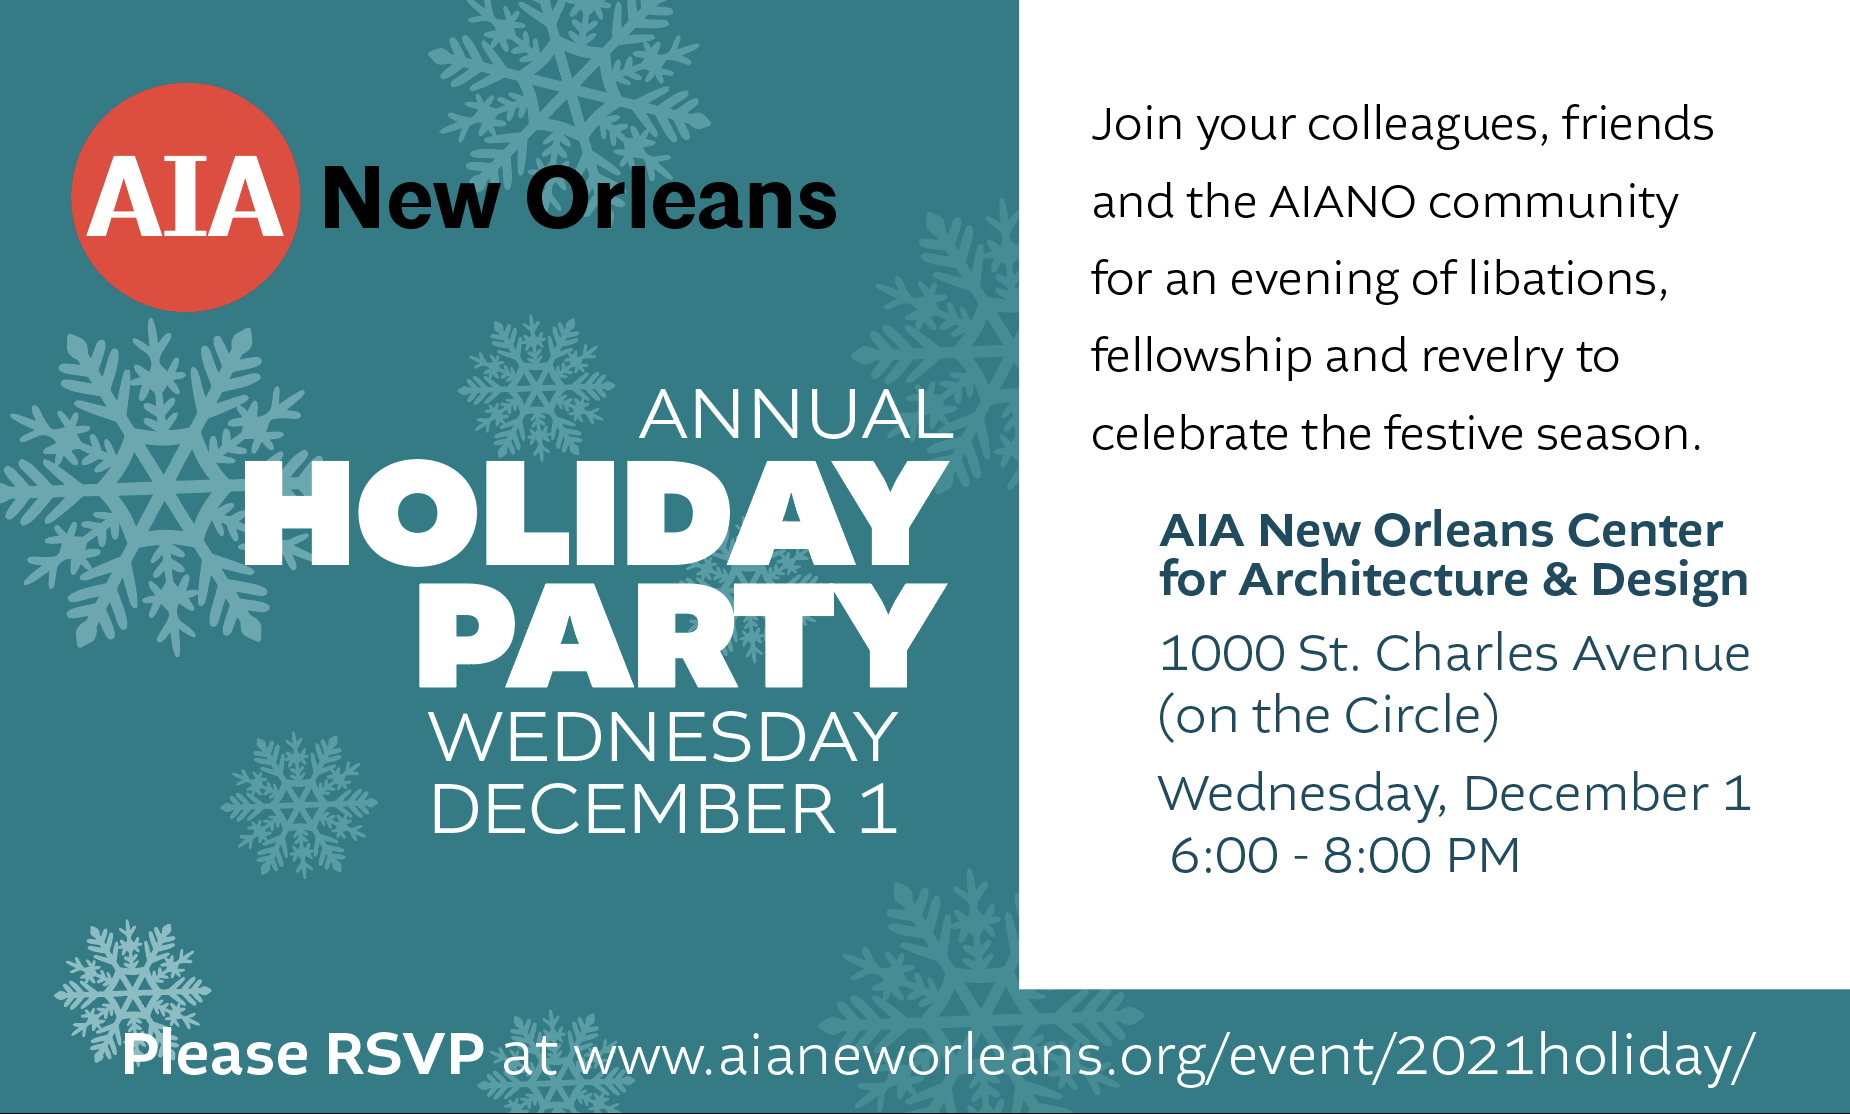 AIANO 2021 Holiday Party